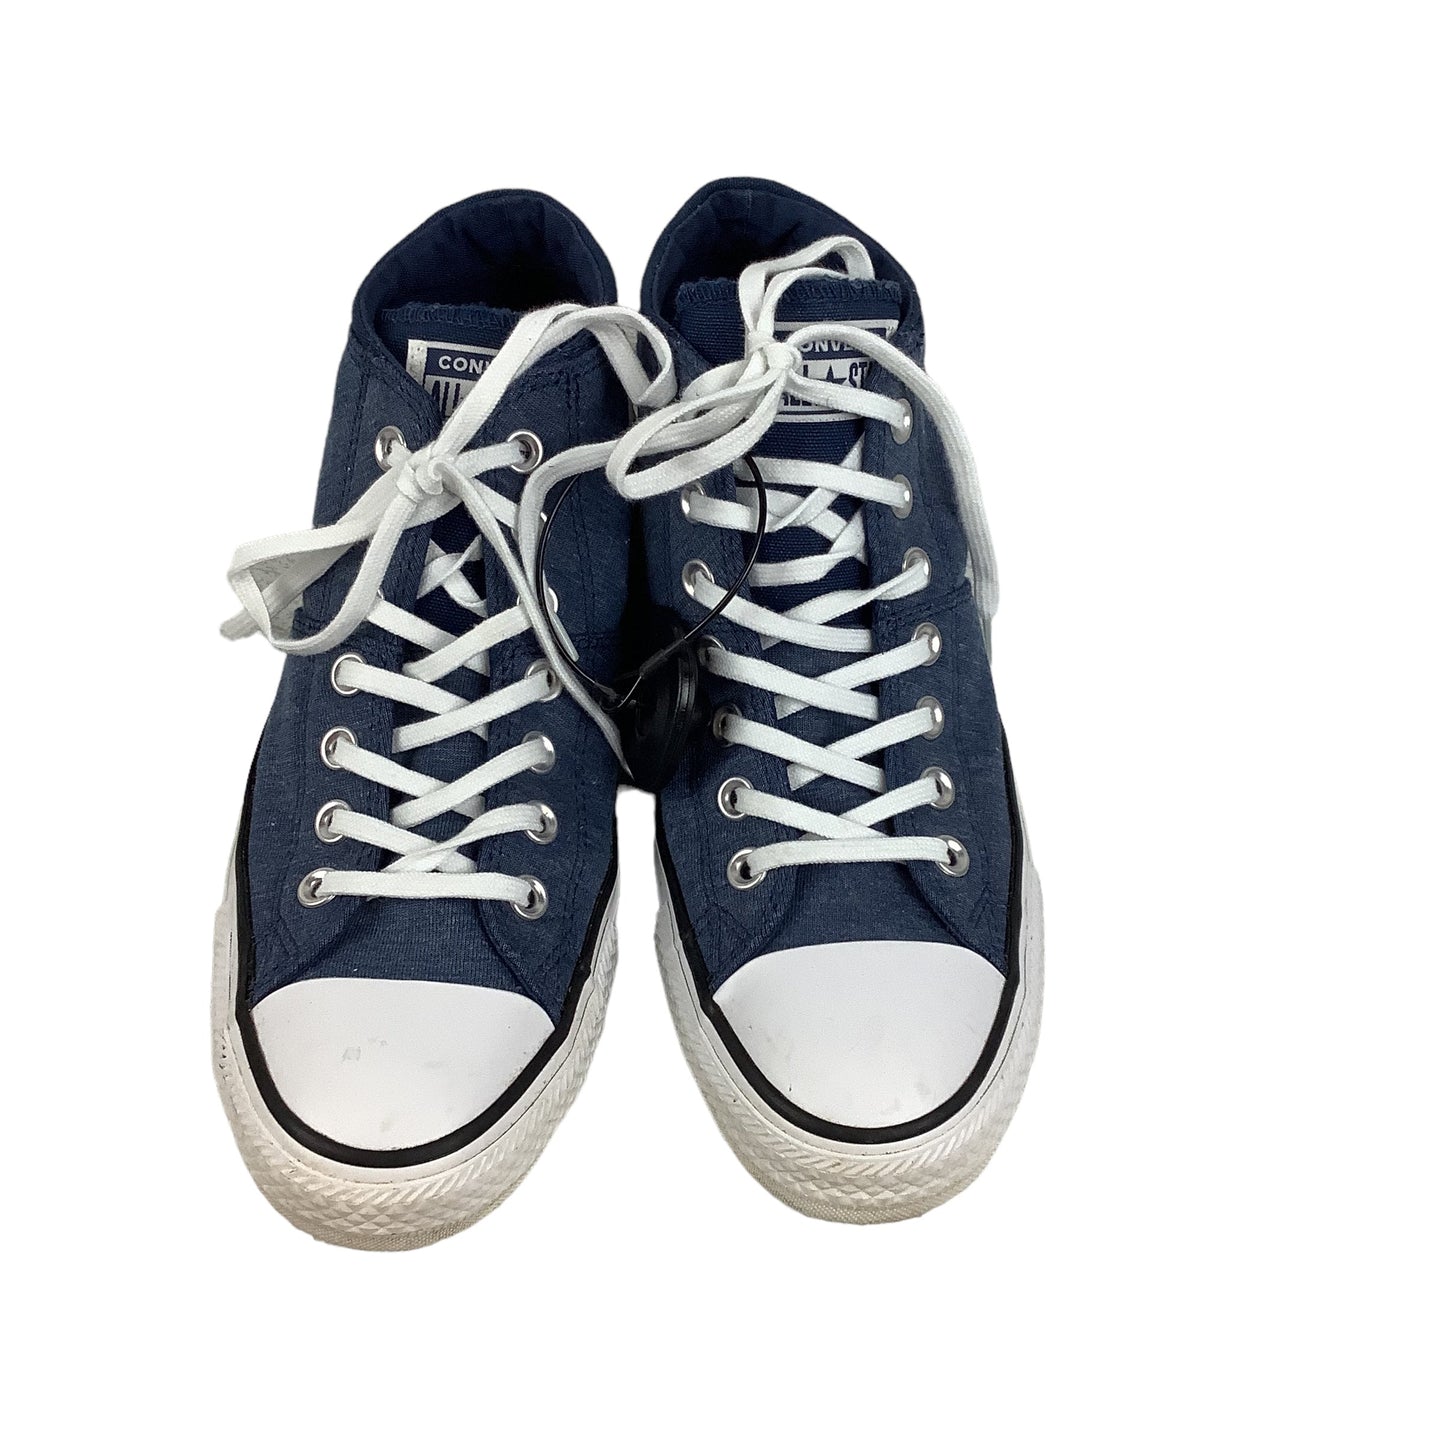 Navy Shoes Sneakers Converse, Size 9